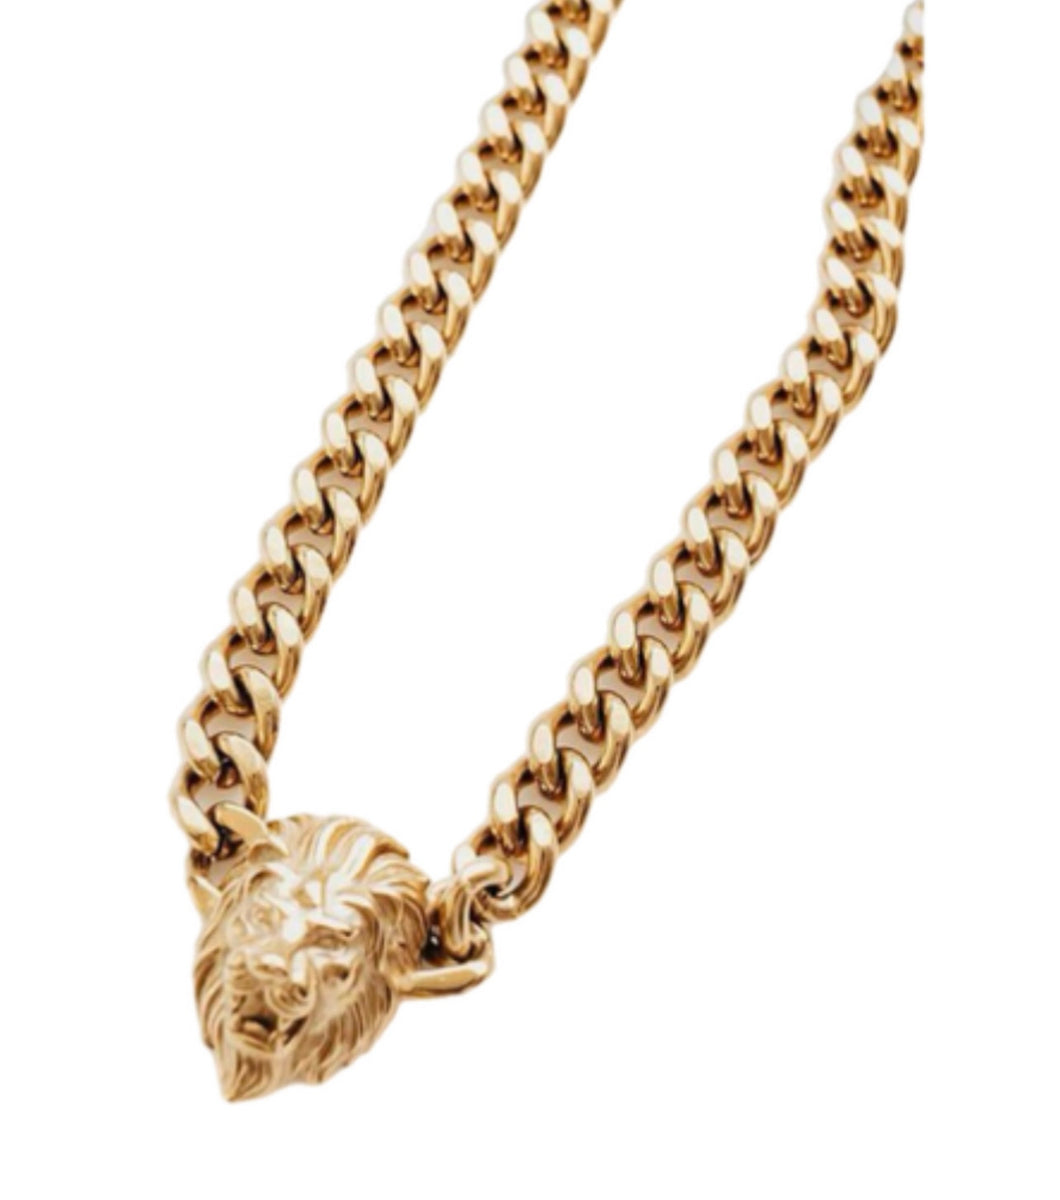 LEO LOVE 18K PLATED NECKLACE By Kesa And Konc